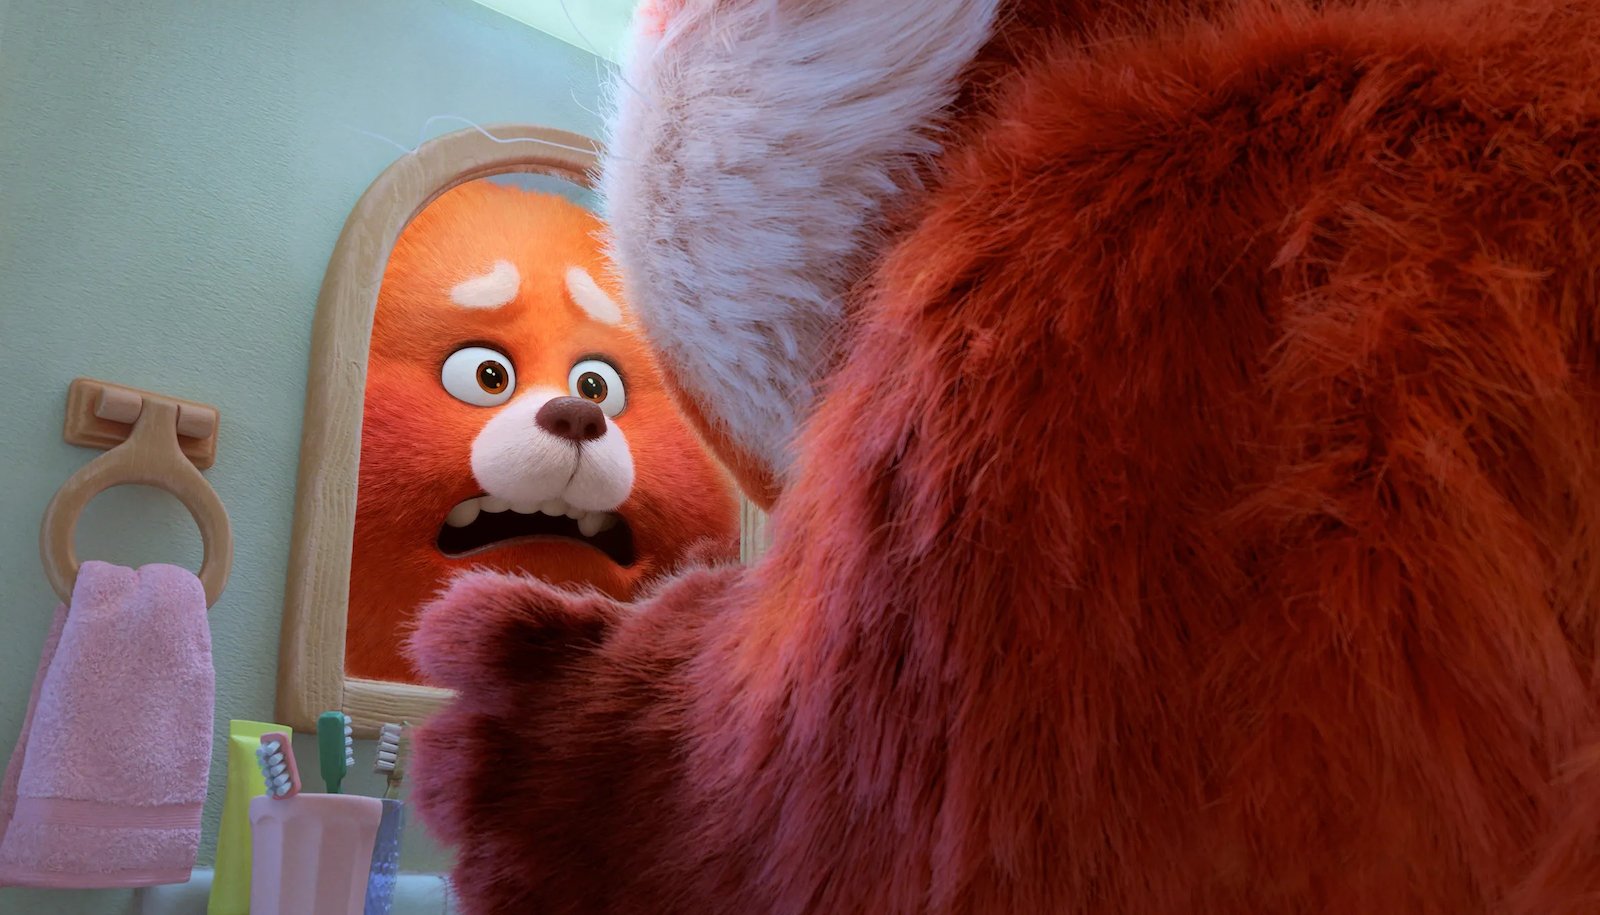 A furry red panda looks in a tiny bathroom mirror with a concerned expression and wide eyes